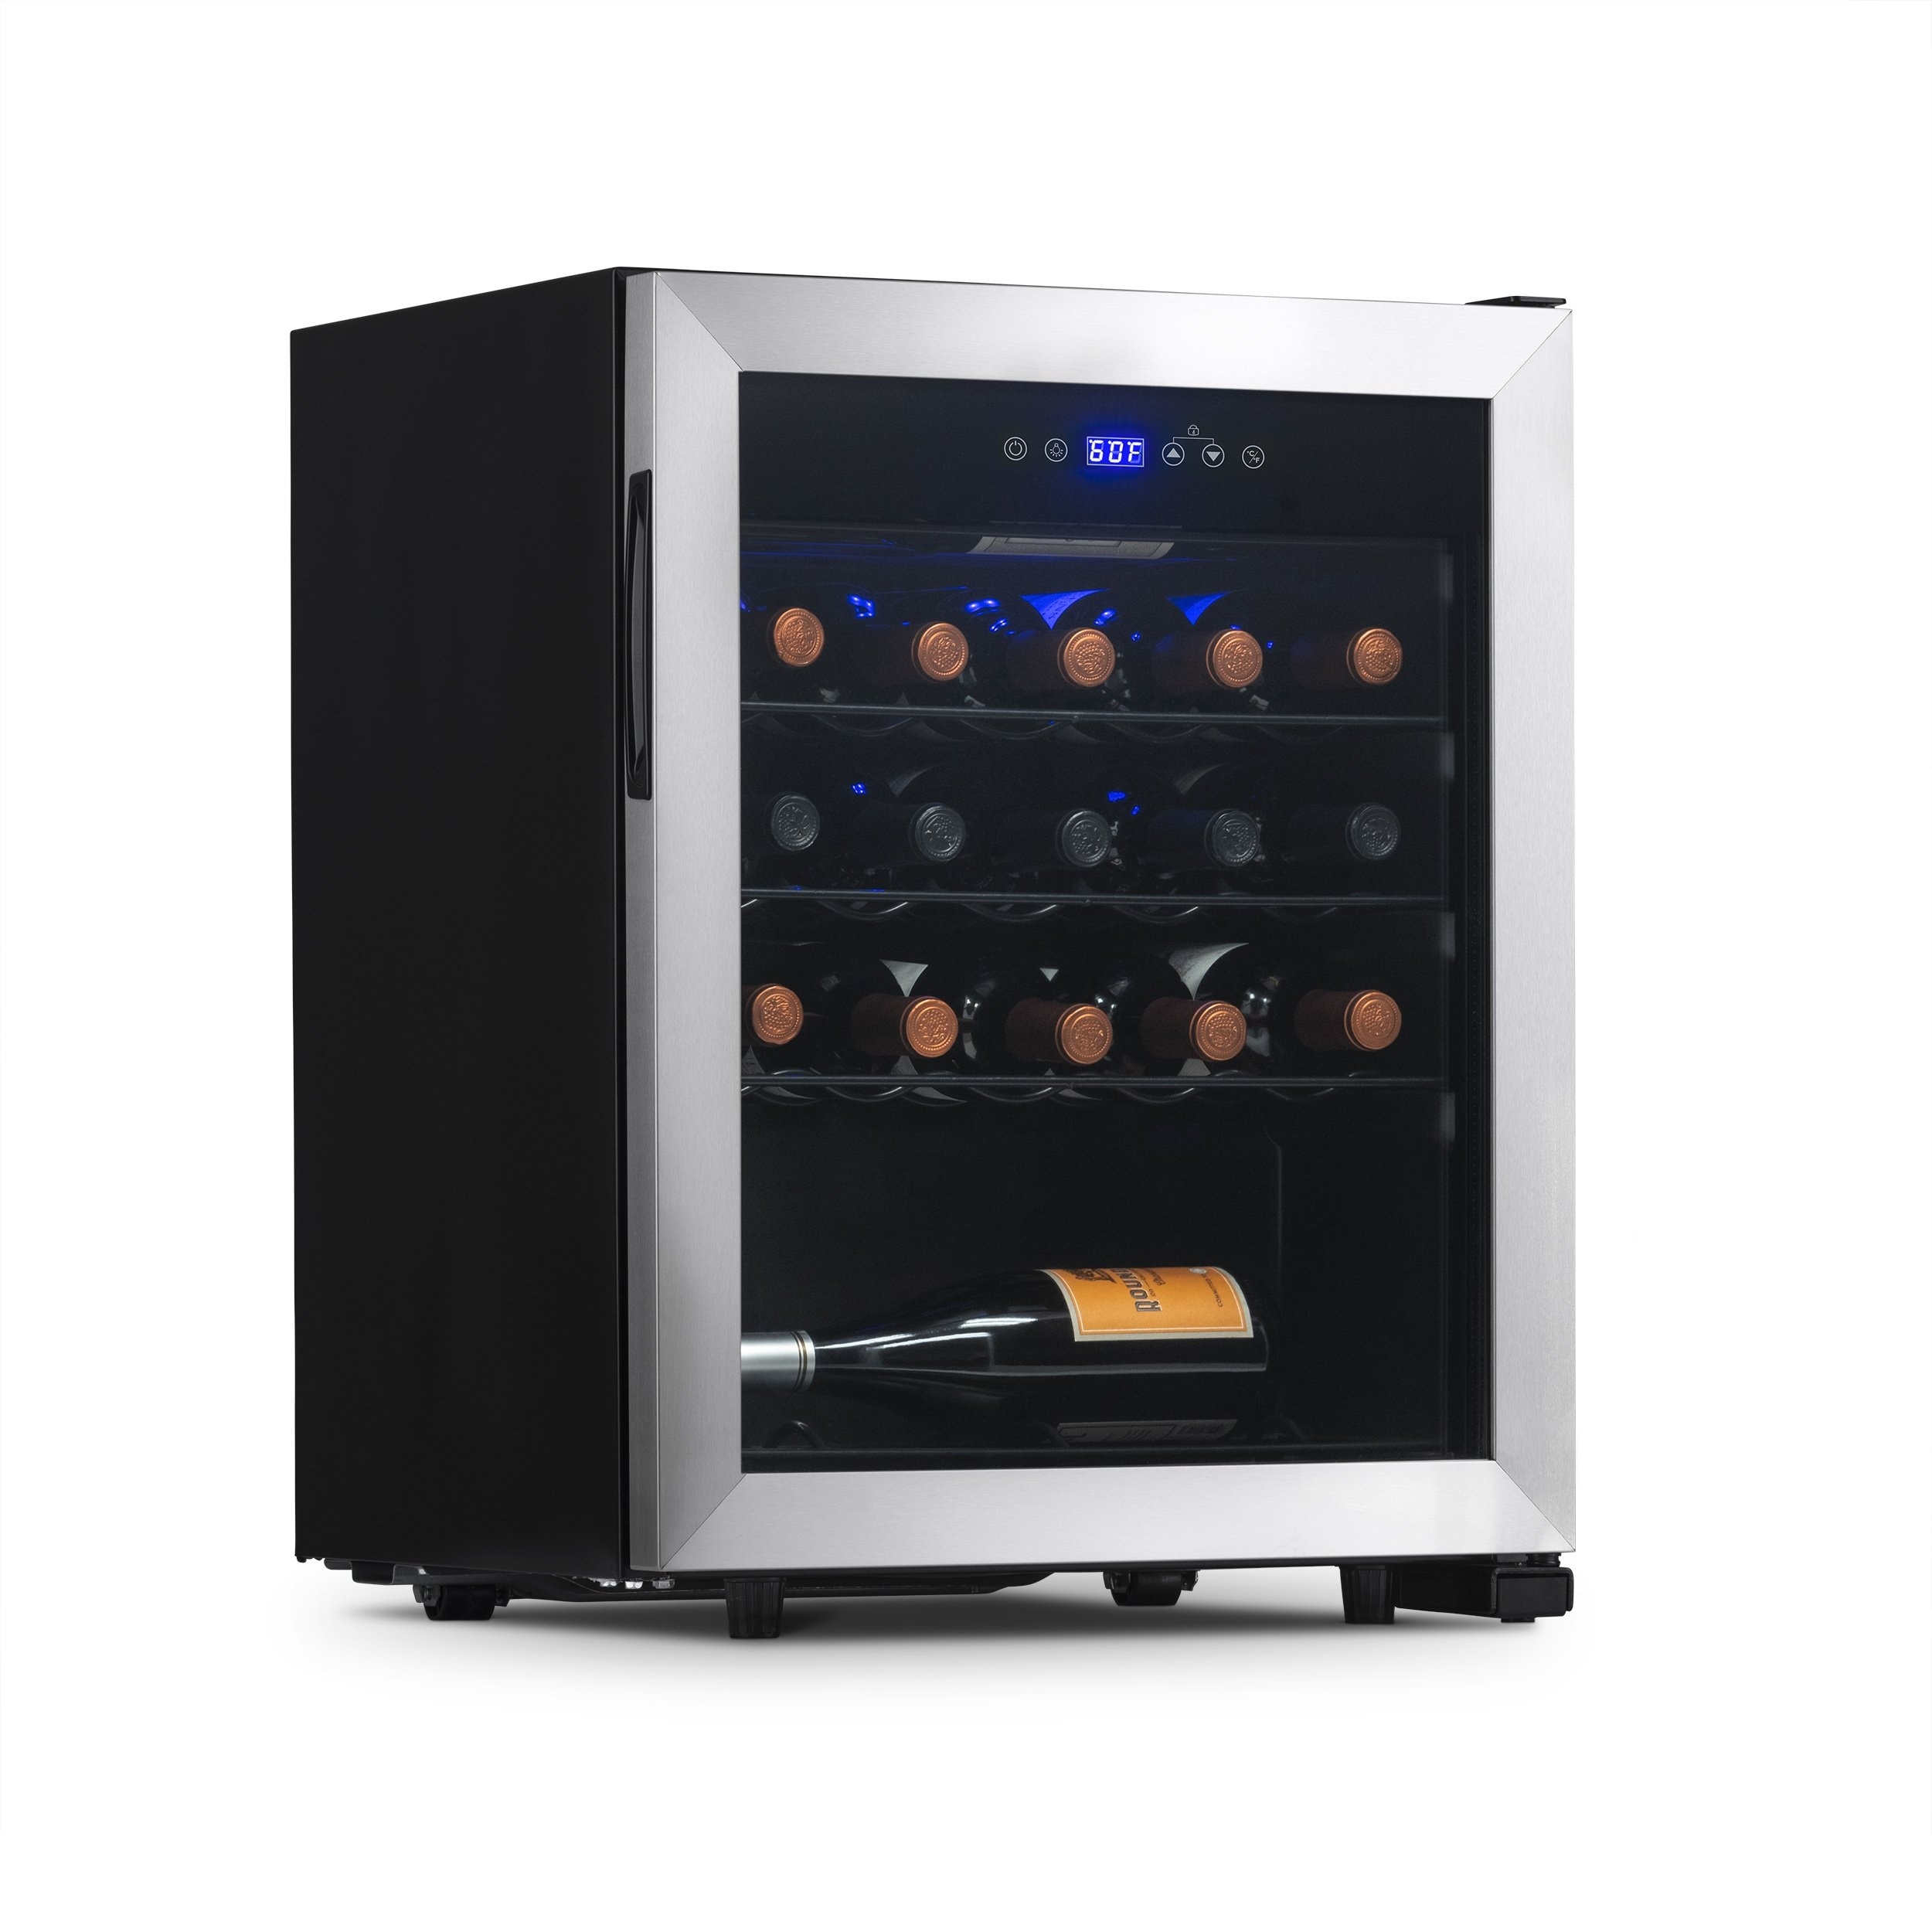 https://ak1.ostkcdn.com/images/products/is/images/direct/572b222b782dc32635885c395dd3274bfb701cfb/NewAir-Freestanding-23-Bottle-Compressor-Wine-Fridge-in-Stainless-Steel%2C-Adjustable-Racks-and-Exterior-Digital-Thermostat.jpg